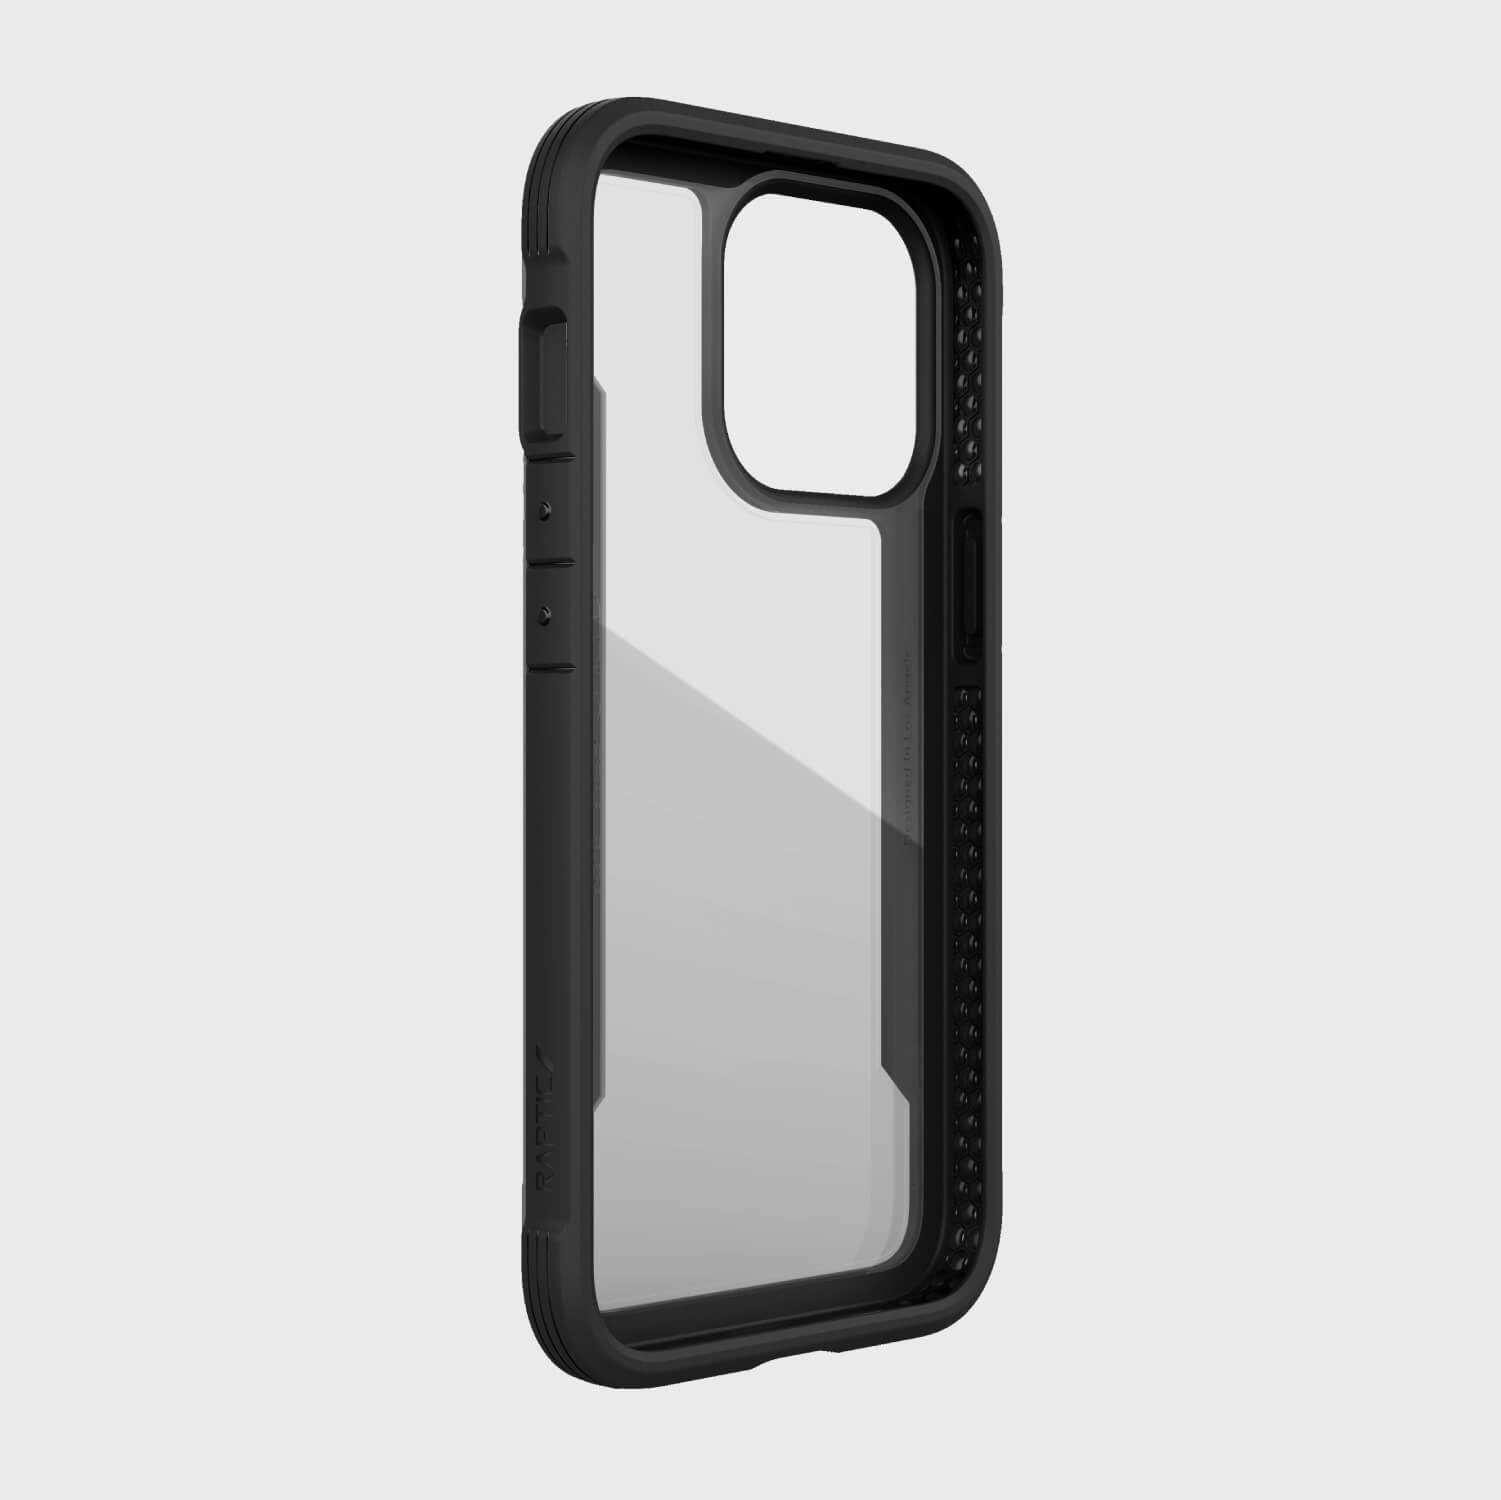 Raptic iPhone 13 Pro Max case - black with drop protection.